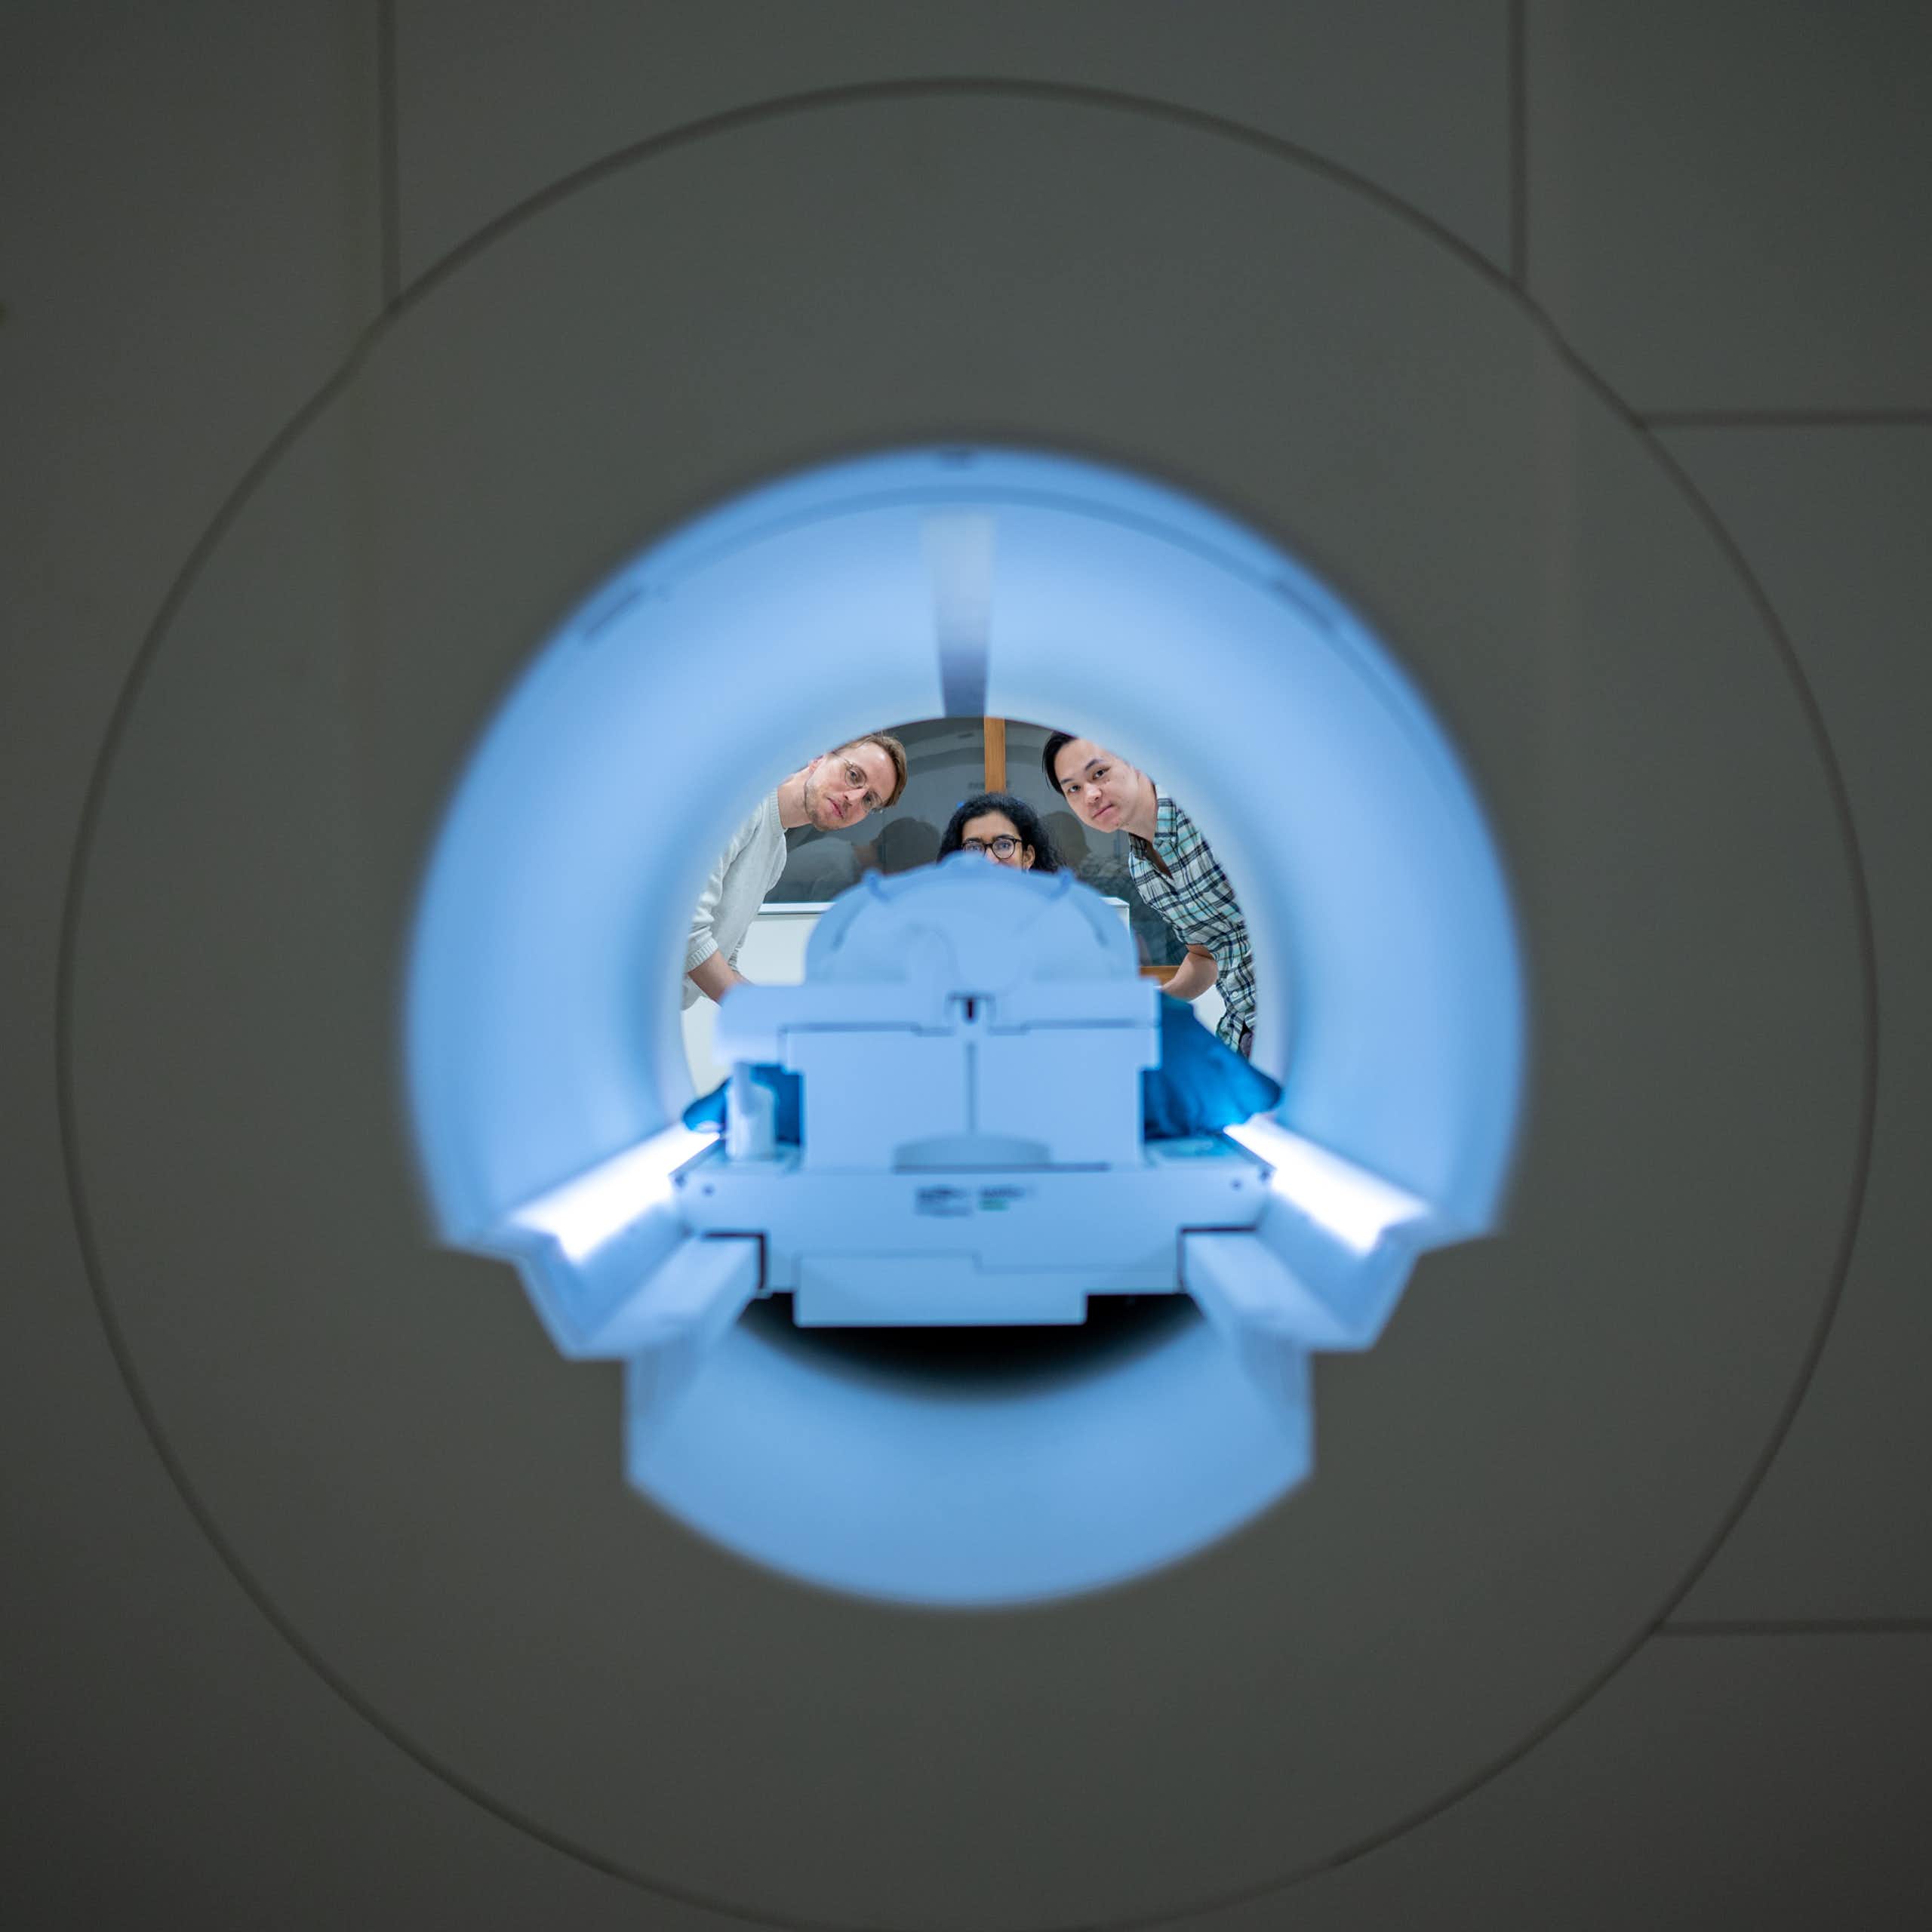 Three neuroscience researchers pose behind a large fMRI brain scanner